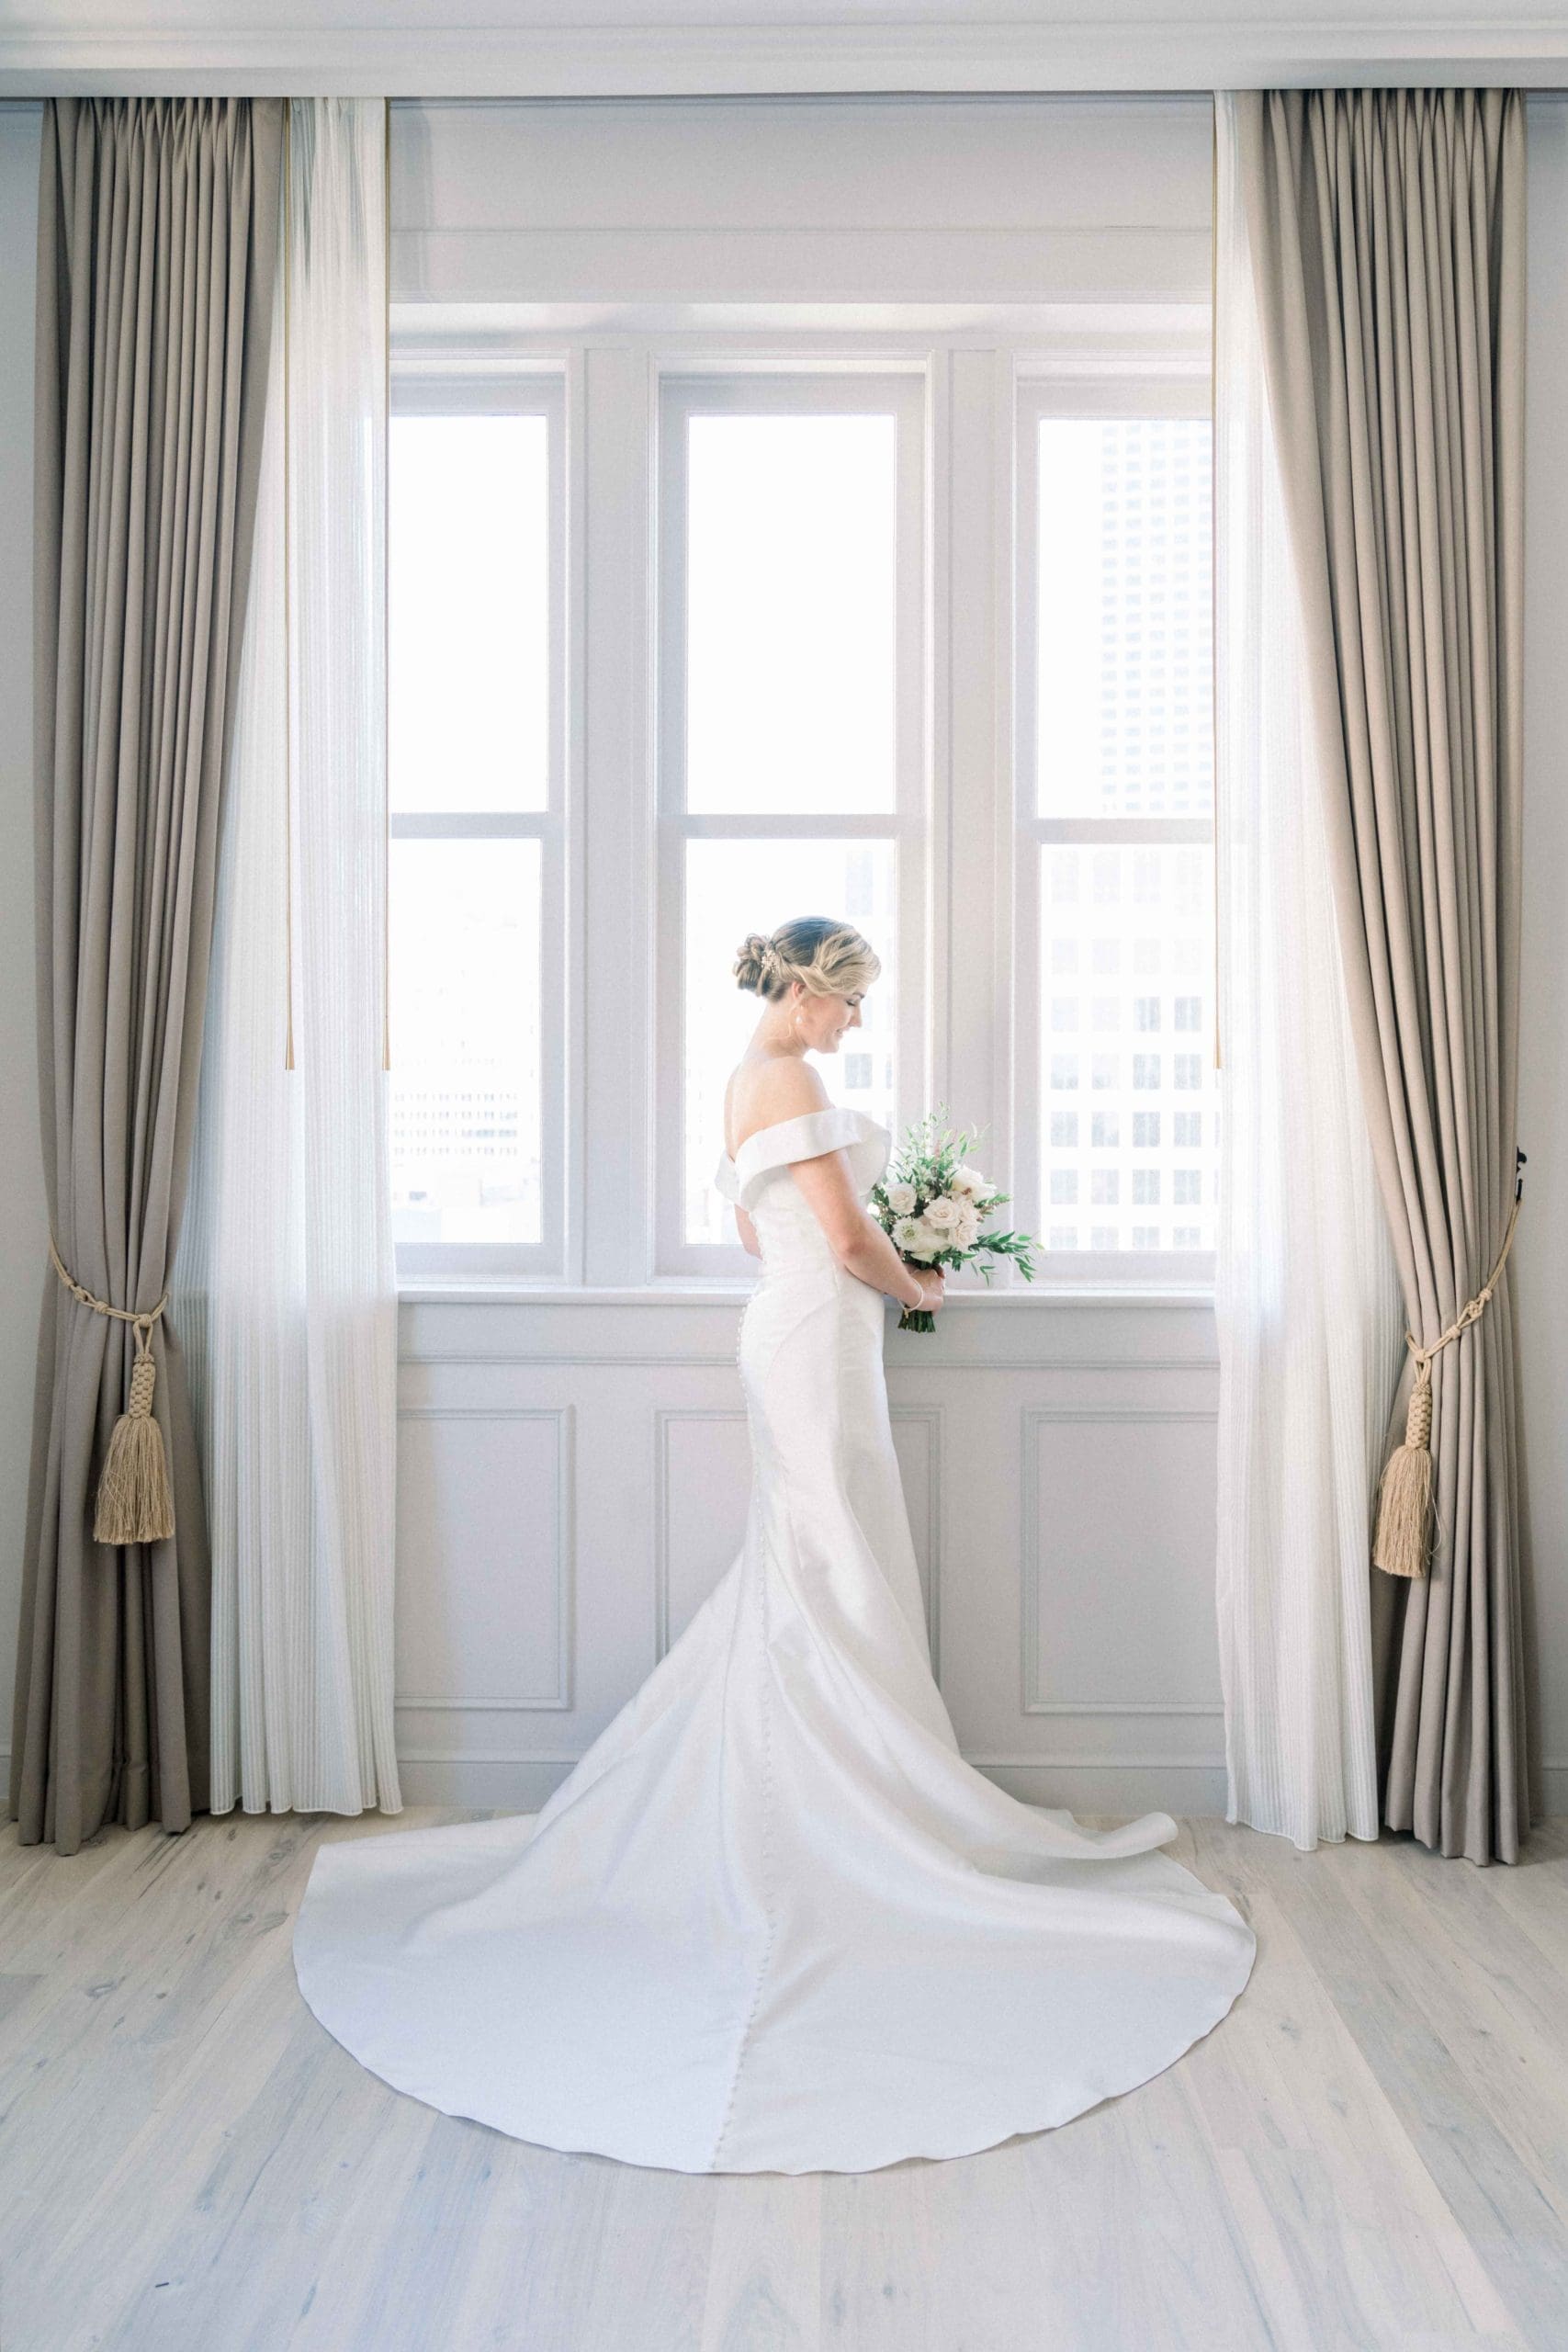 Bride gazing at bouquest in front of window at the Maison De La Luz Hotel in New Orleans